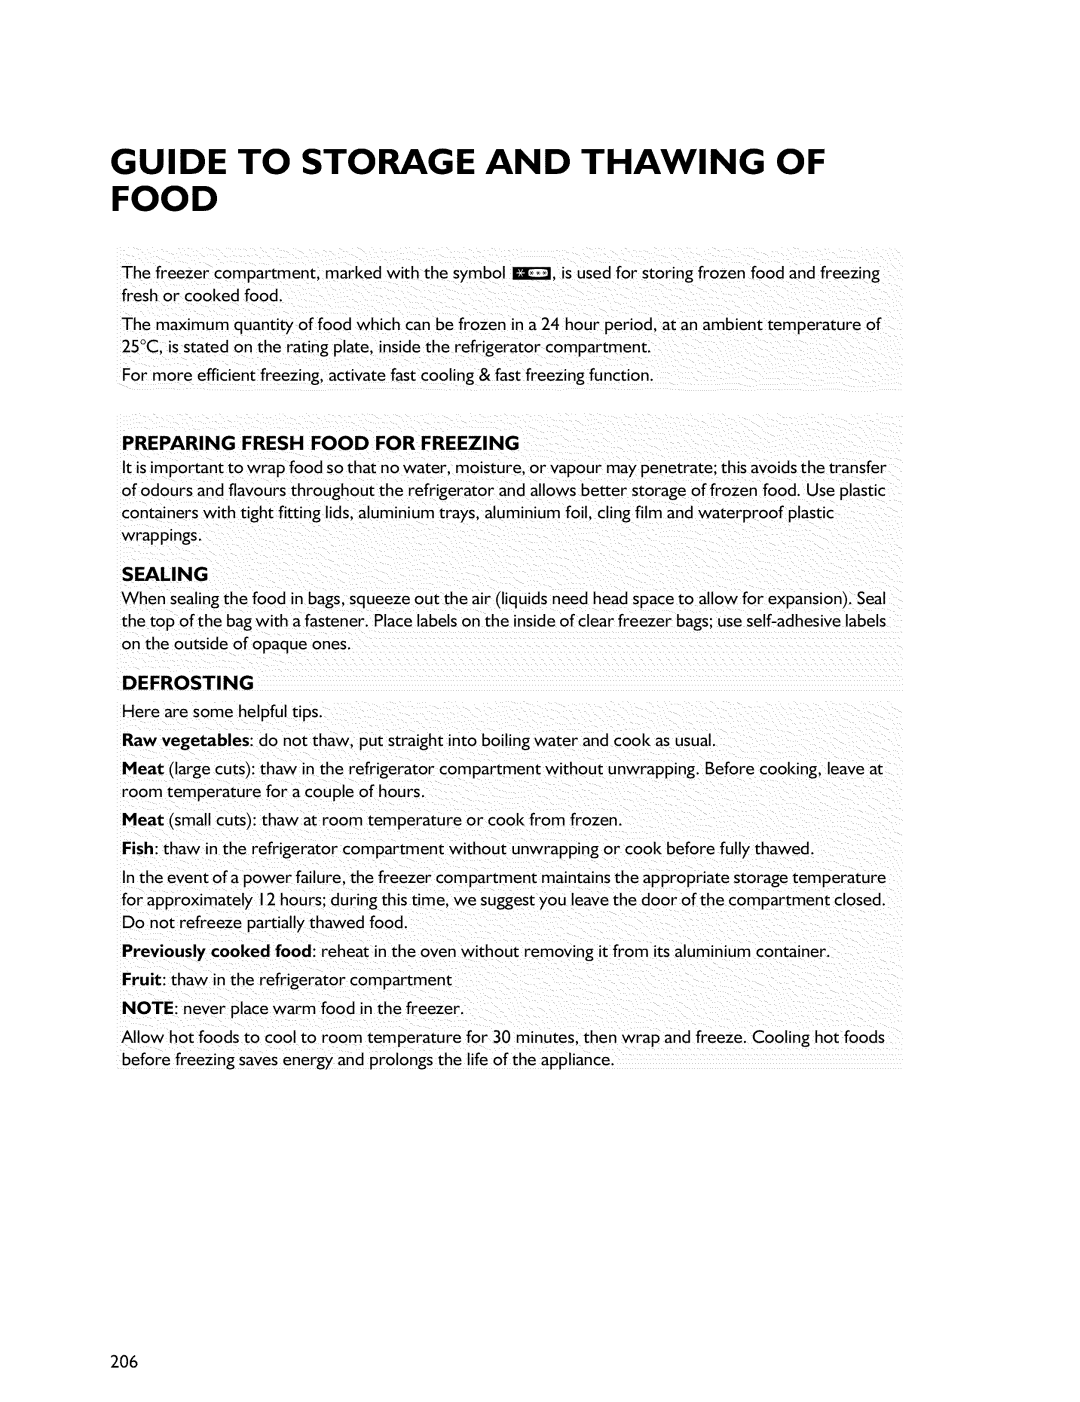 Whirlpool Freezer manual Guide to Storage and Thawing of Food, Wrappings 